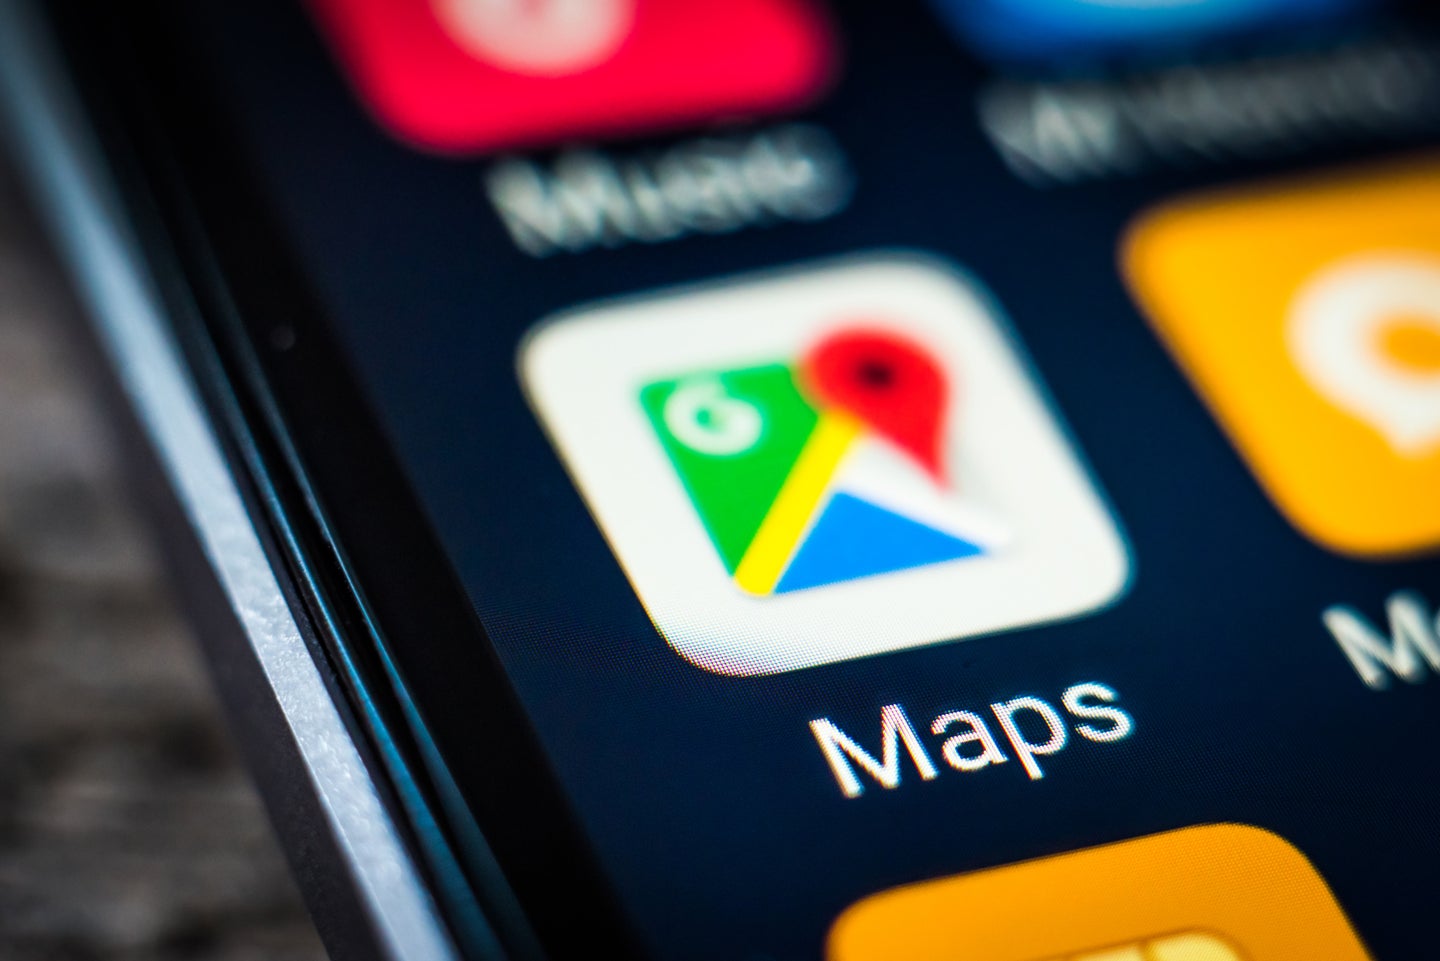 A smartphone screen displaying the Google Maps app icon.